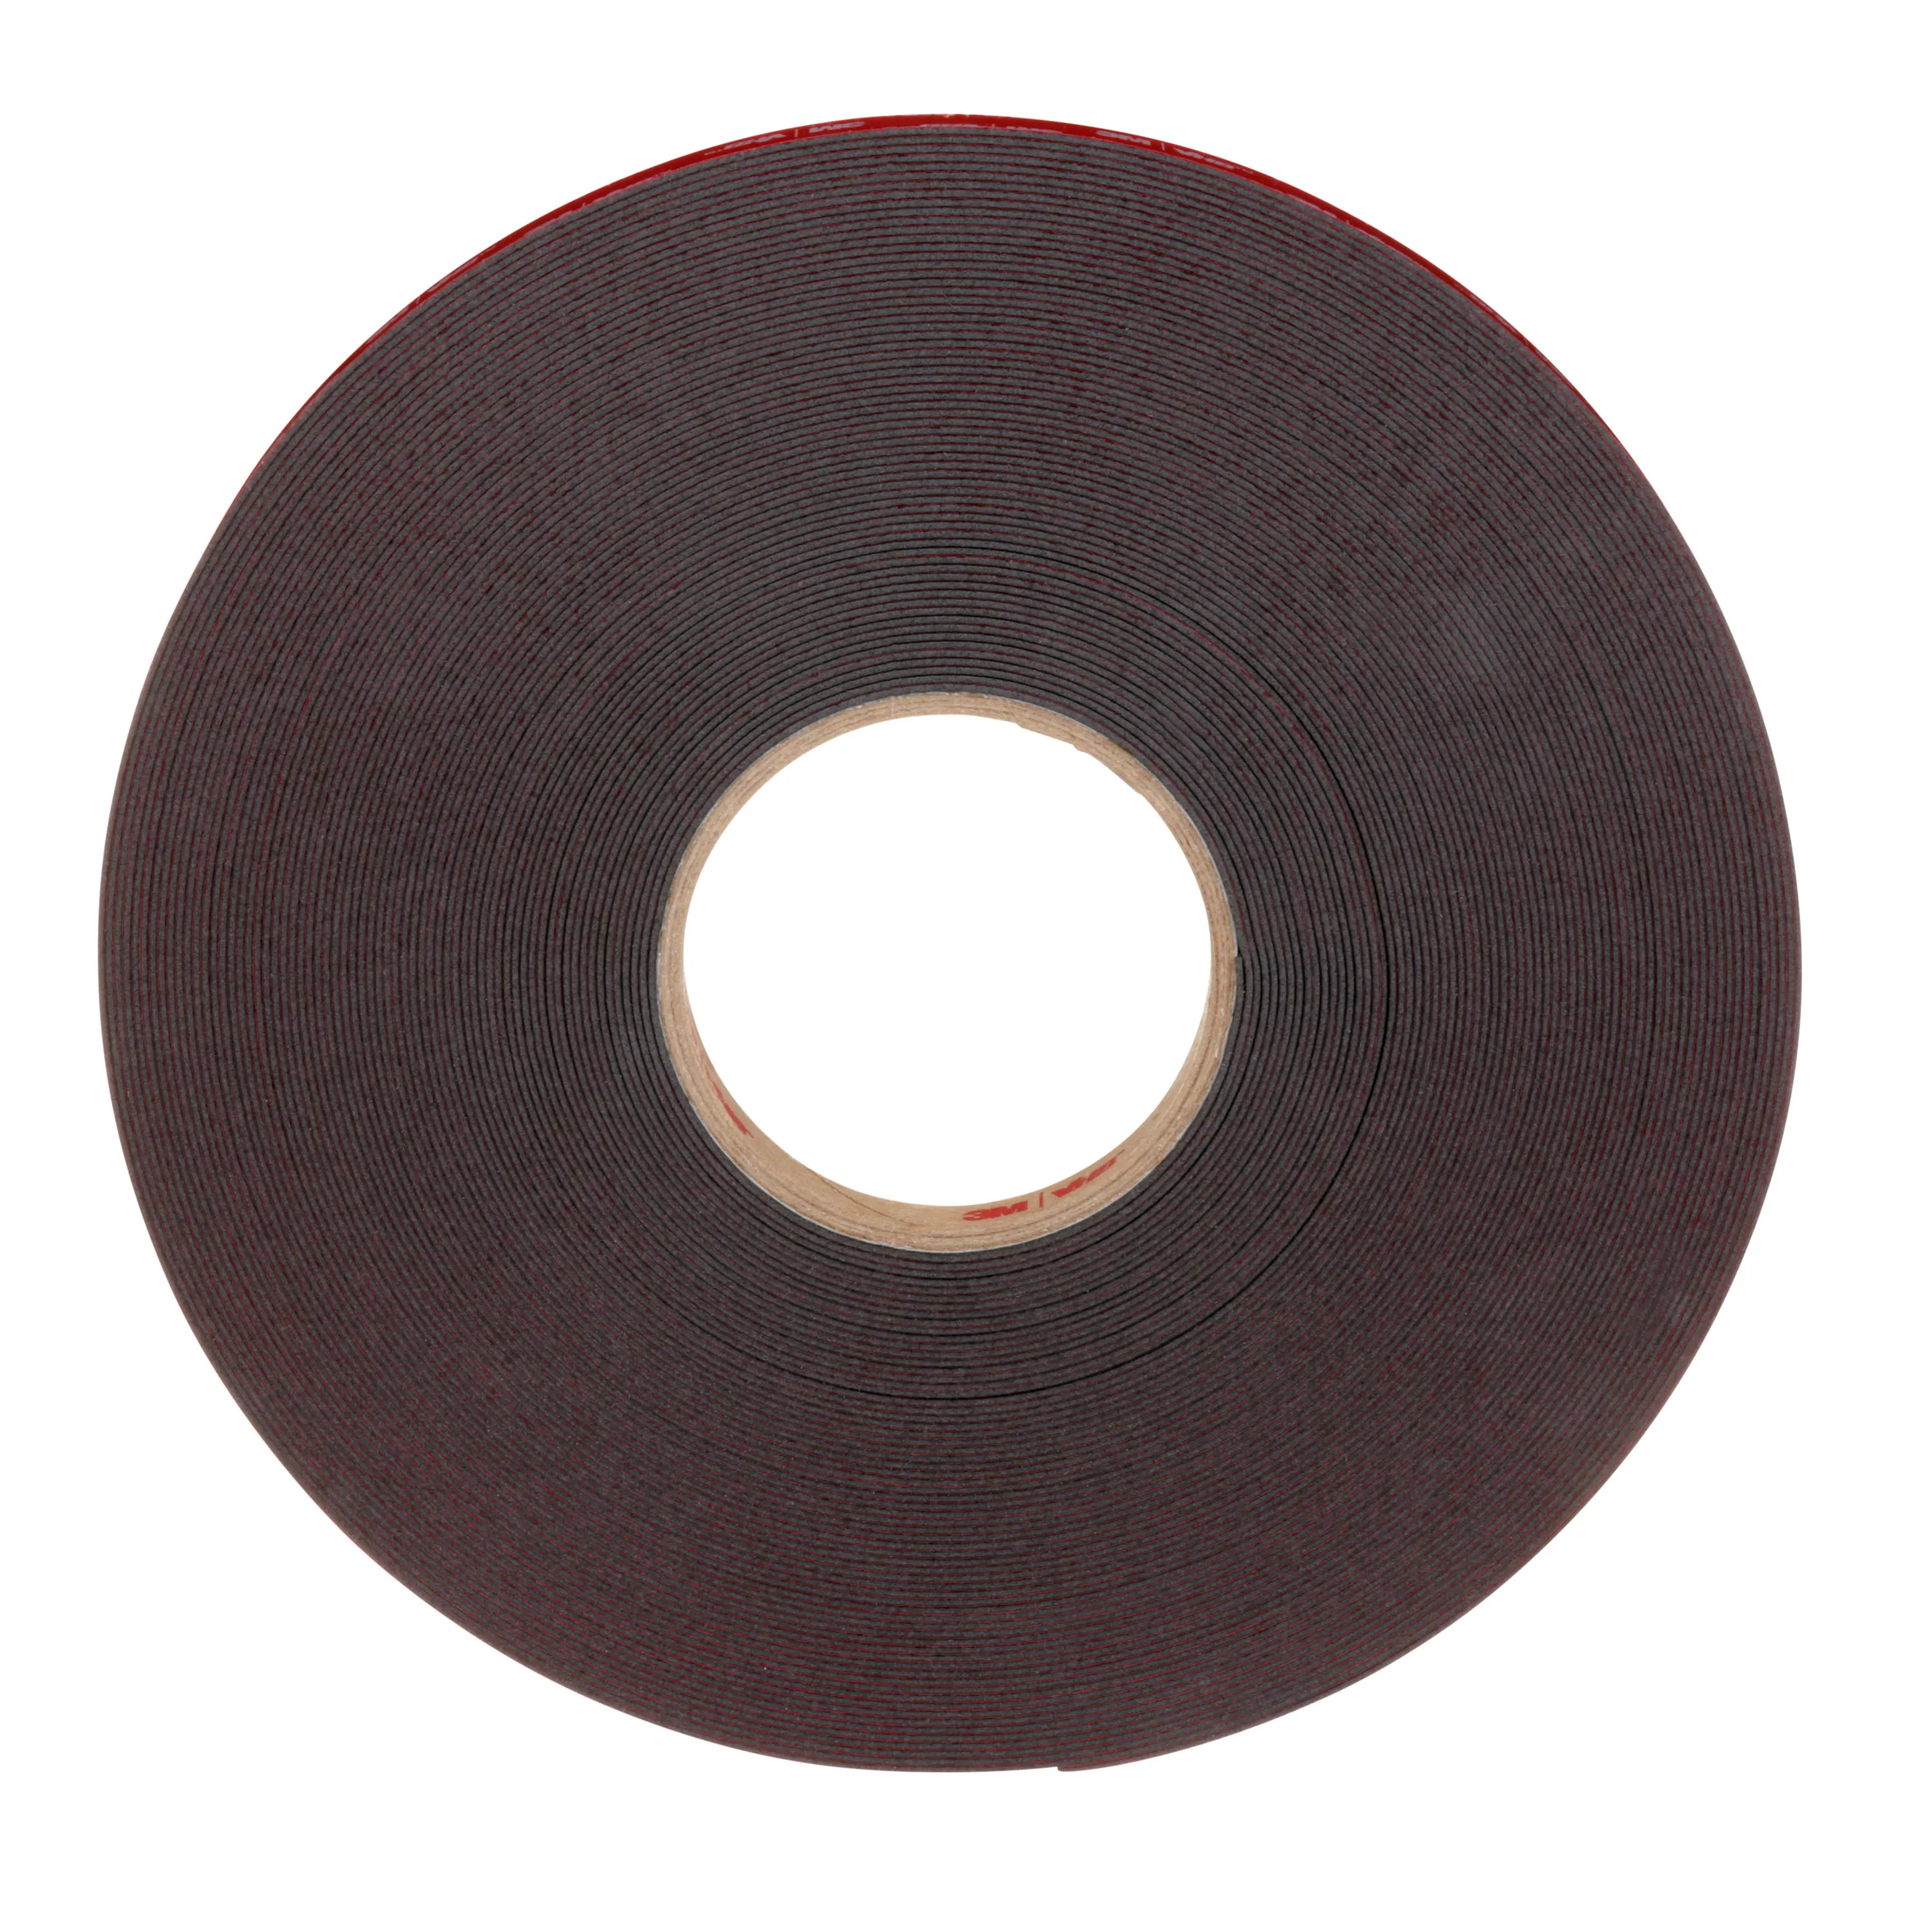 Product Number 5952 | 3M™ VHB™ Tape 5952